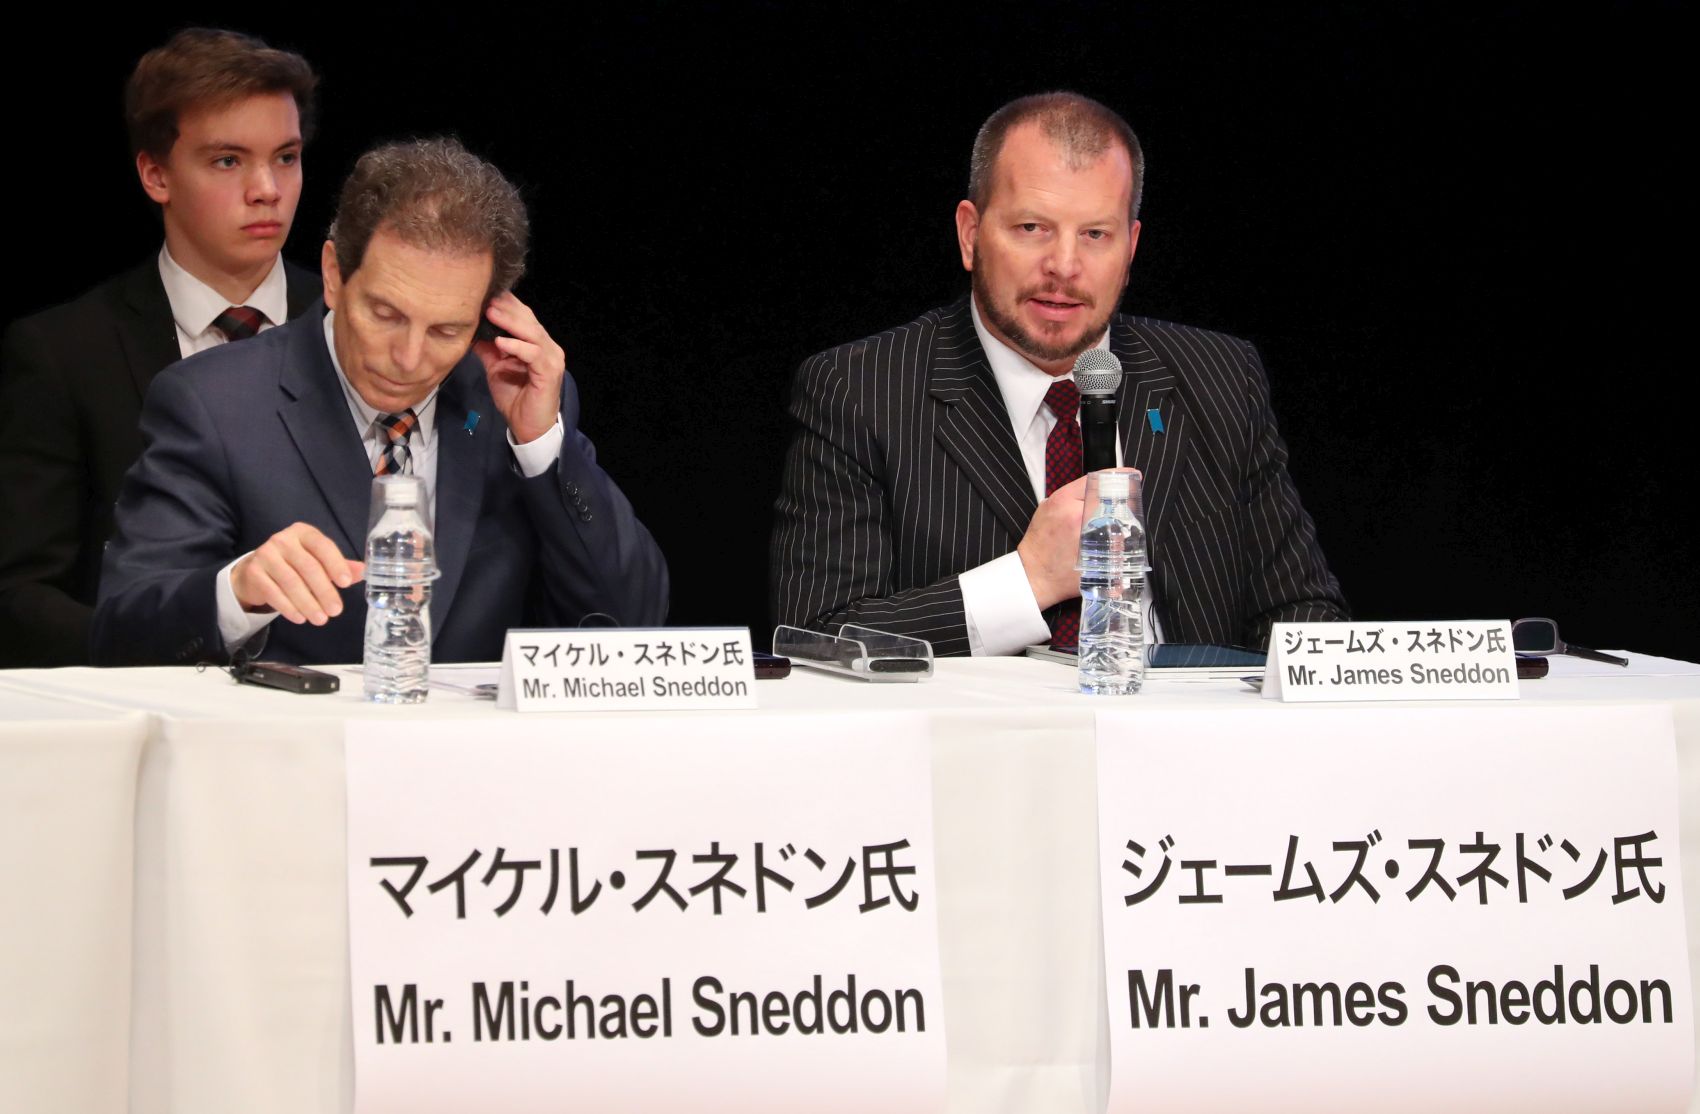 Tokyo Symposium Pushes for Resolution of North Korean Abductions, Human Rights Violations